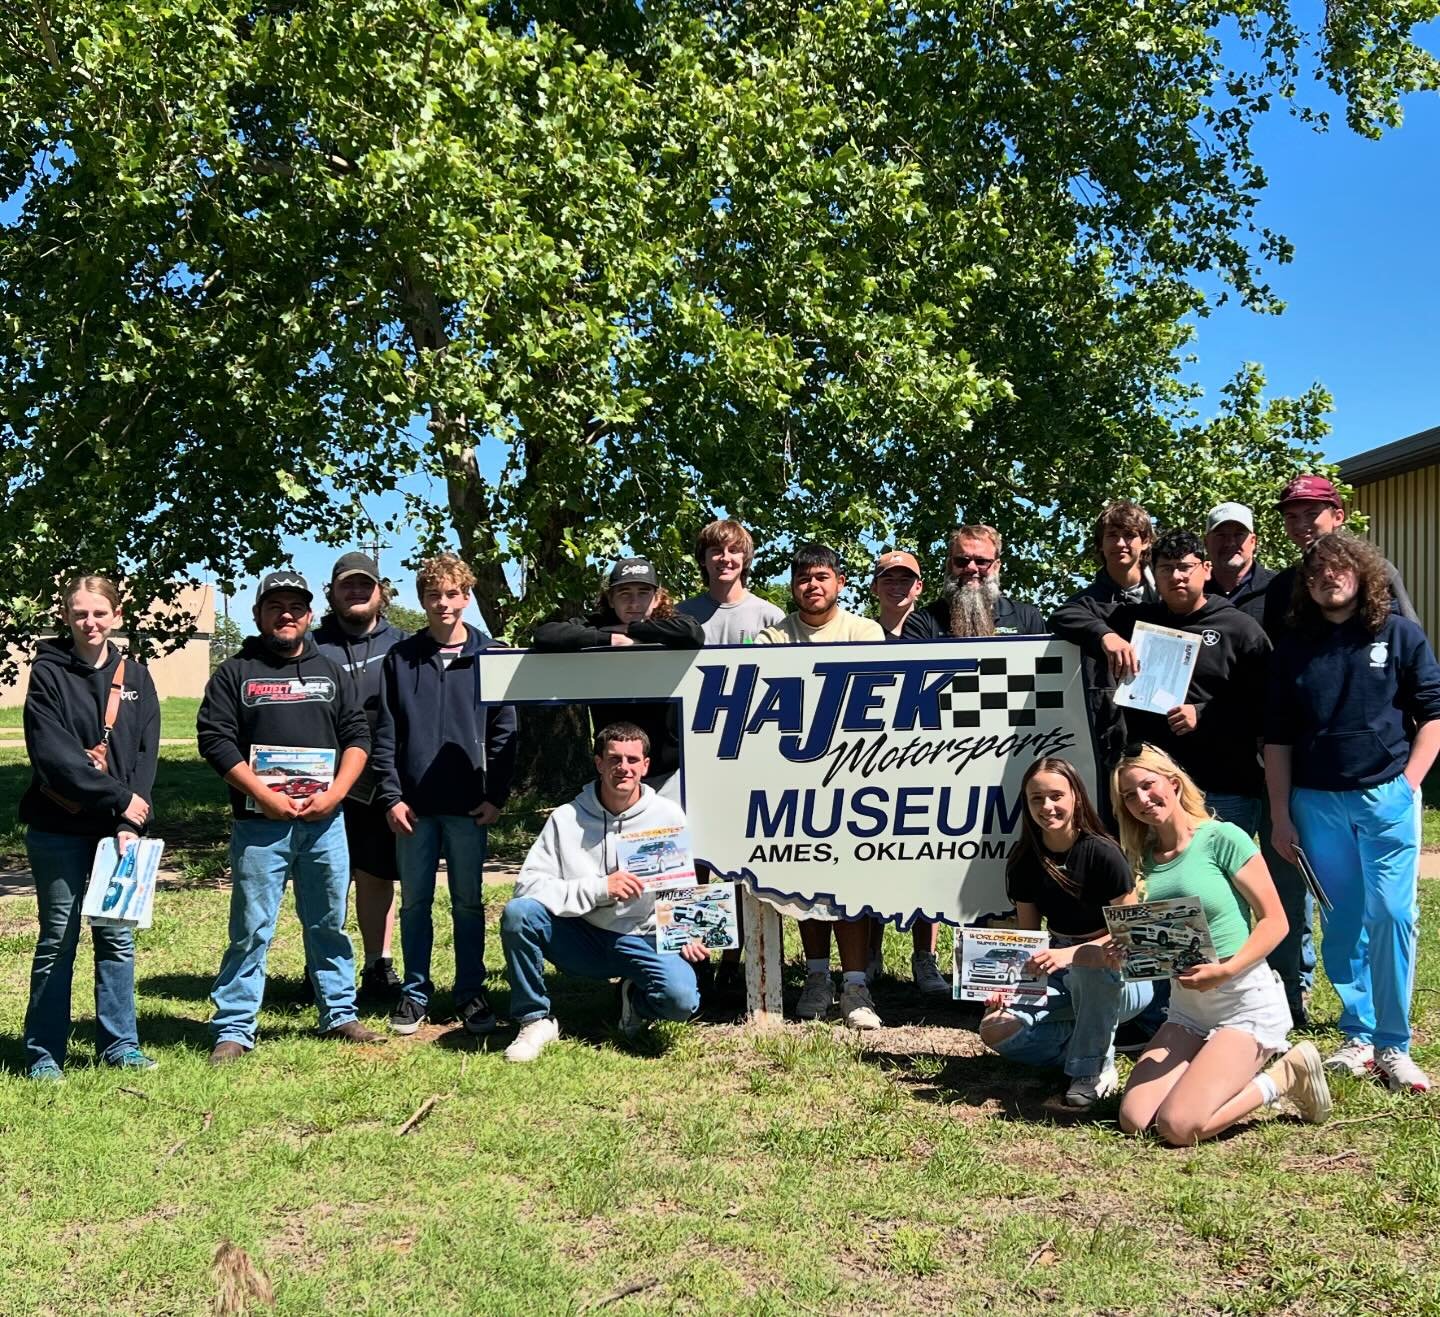 The Automotive Program visited the Hajek Motorsports Museum and Dunsworth Machine on their field trip yesterday!